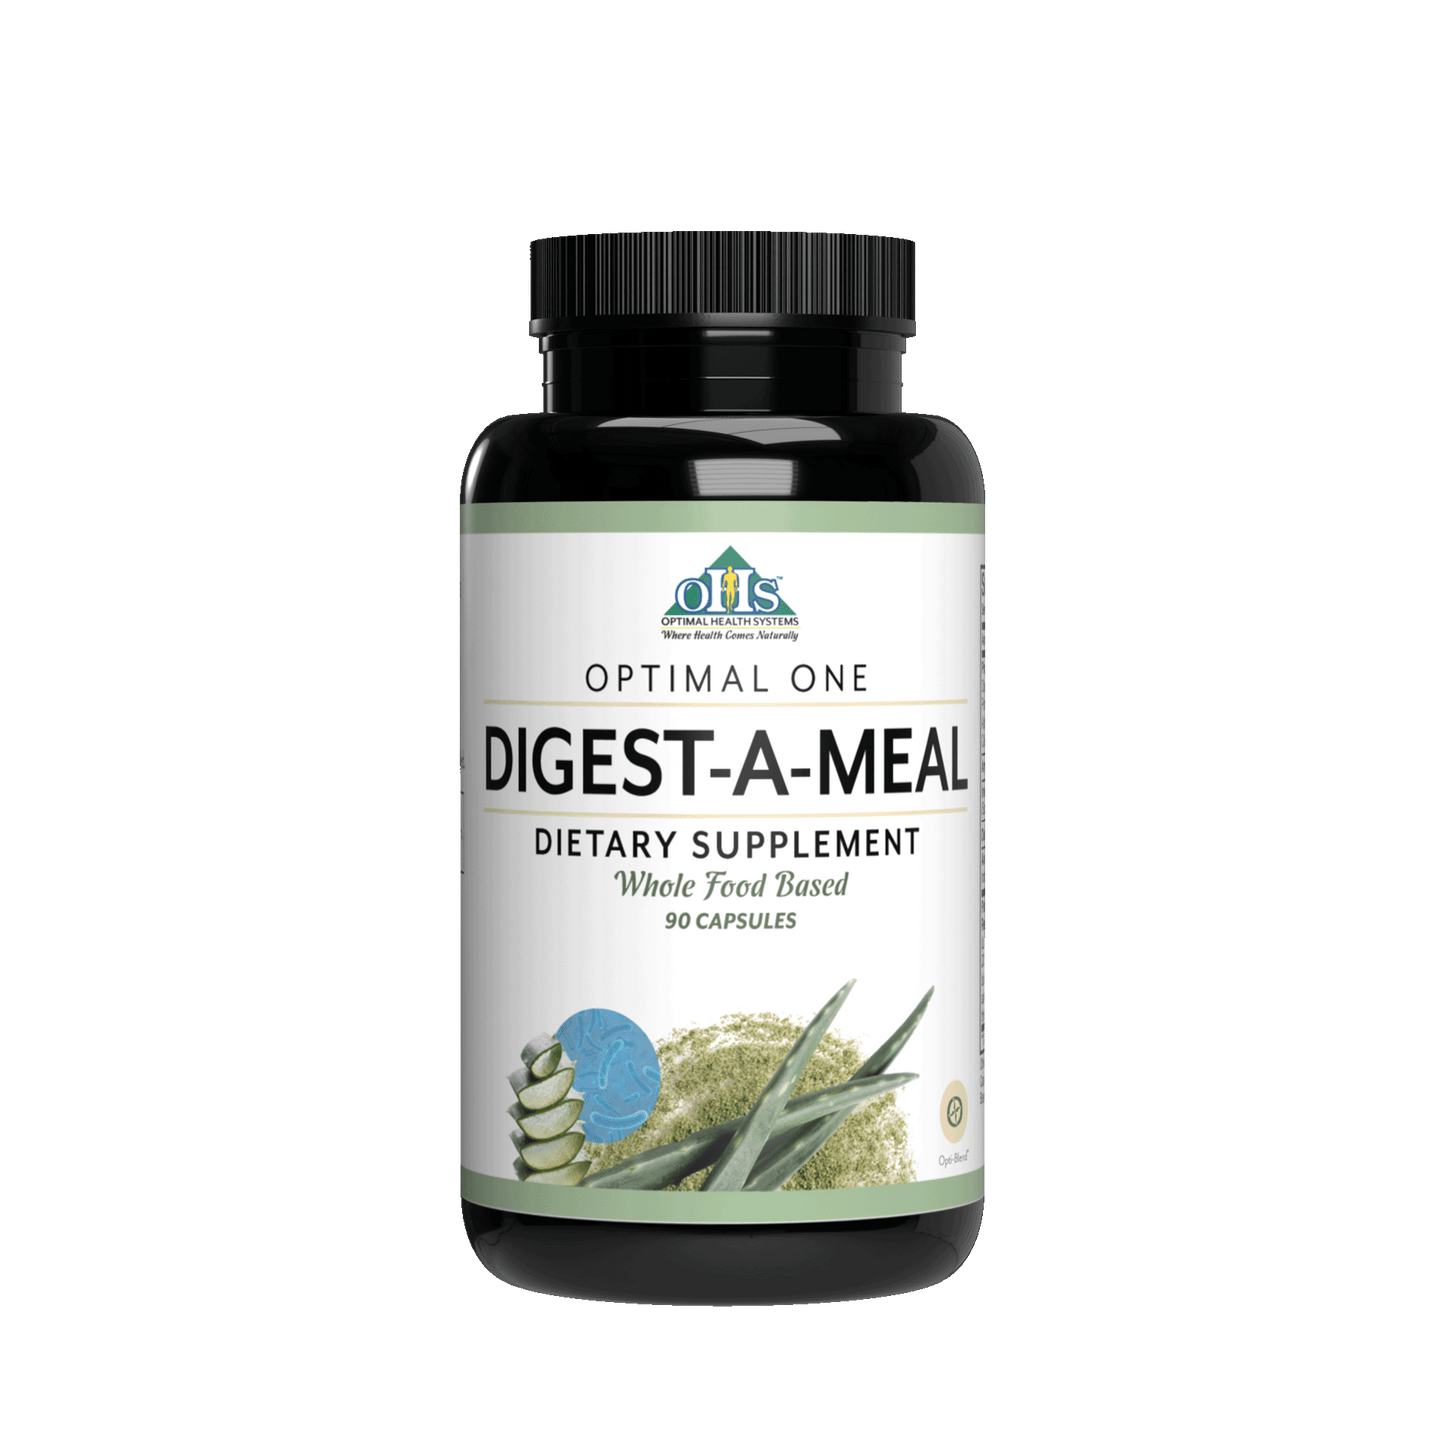 Optimal 1 Digest-A-Meal